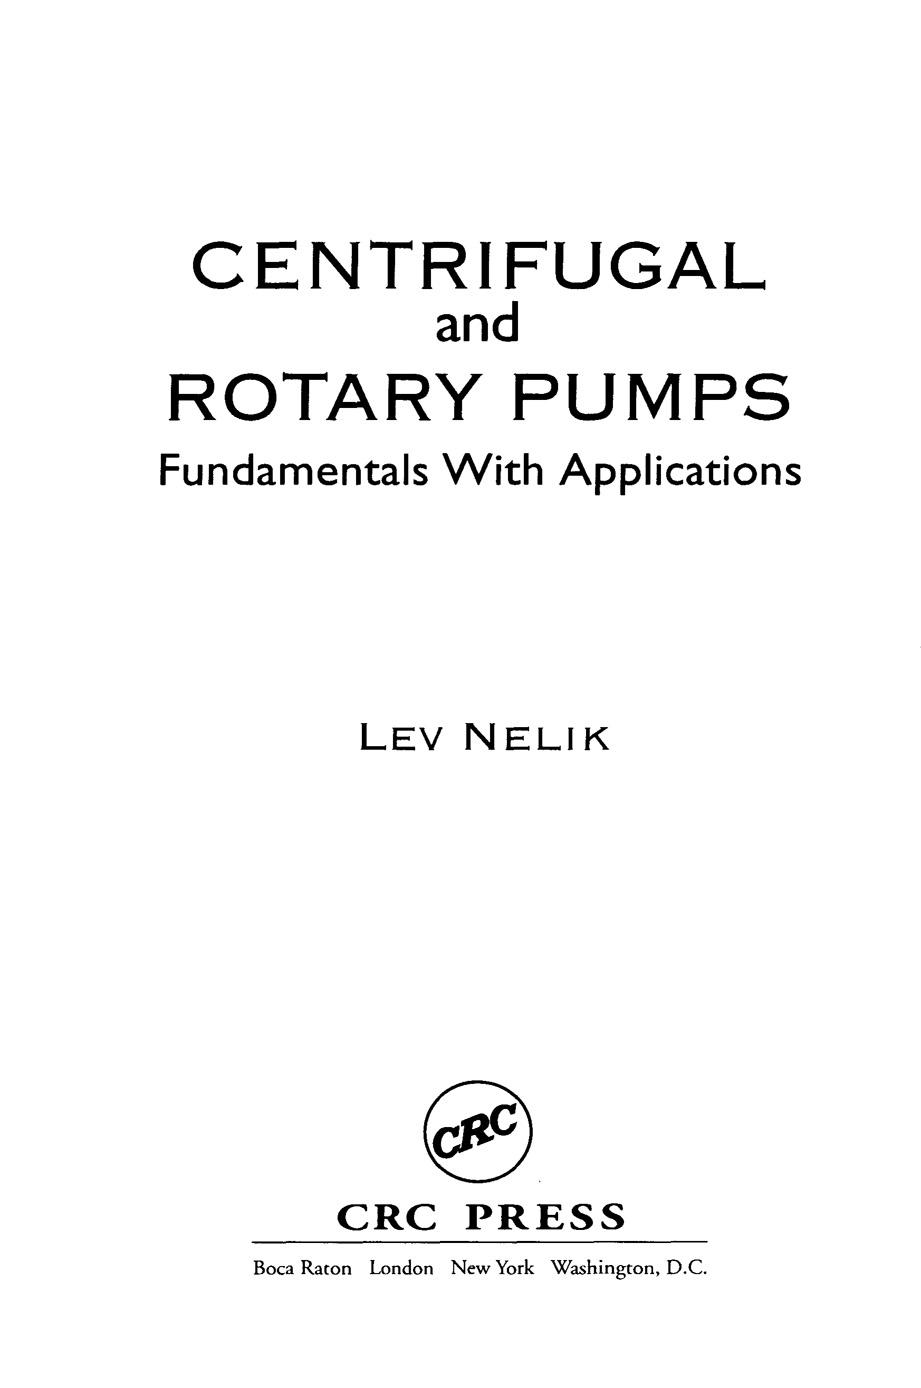 Engineering - Centrifugal And Rotary Pumps